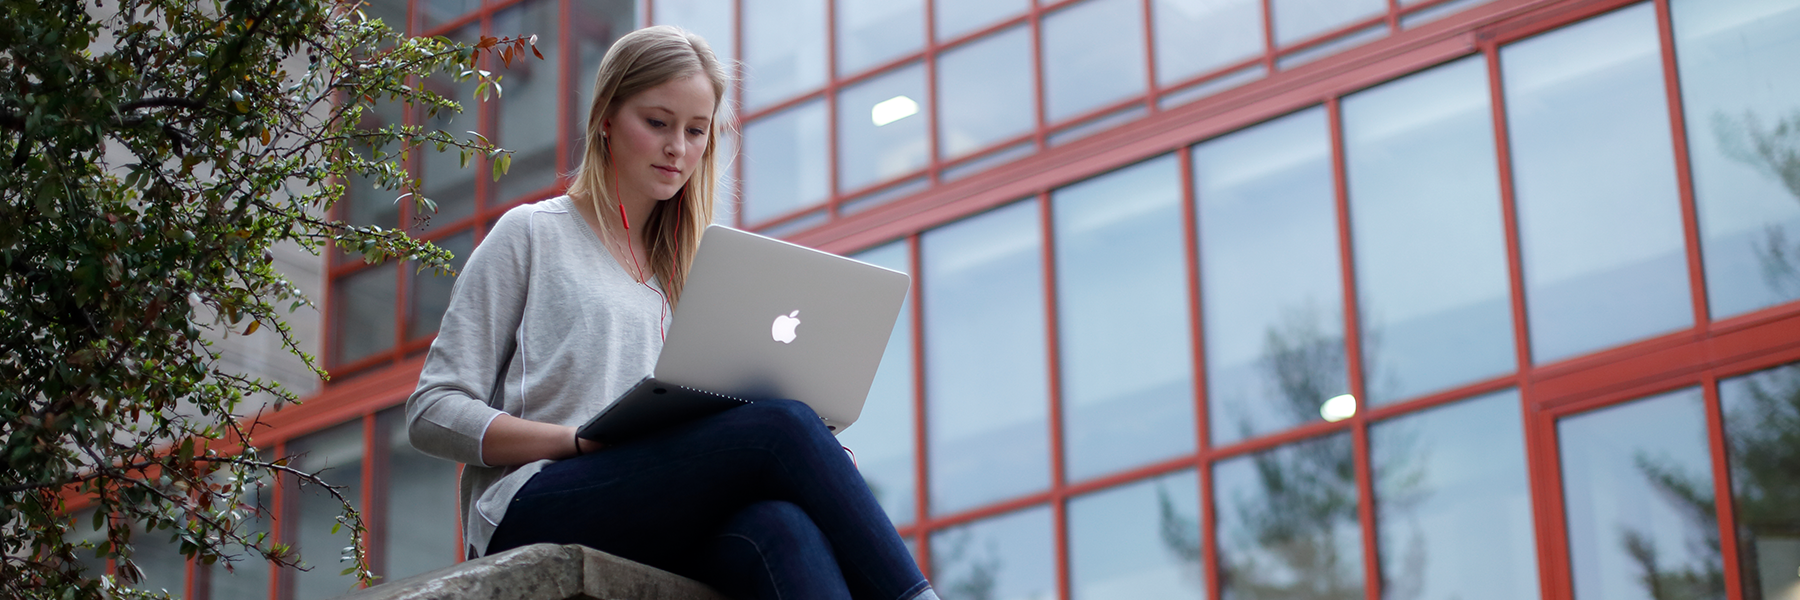 A student works on her laptop outside a campus building